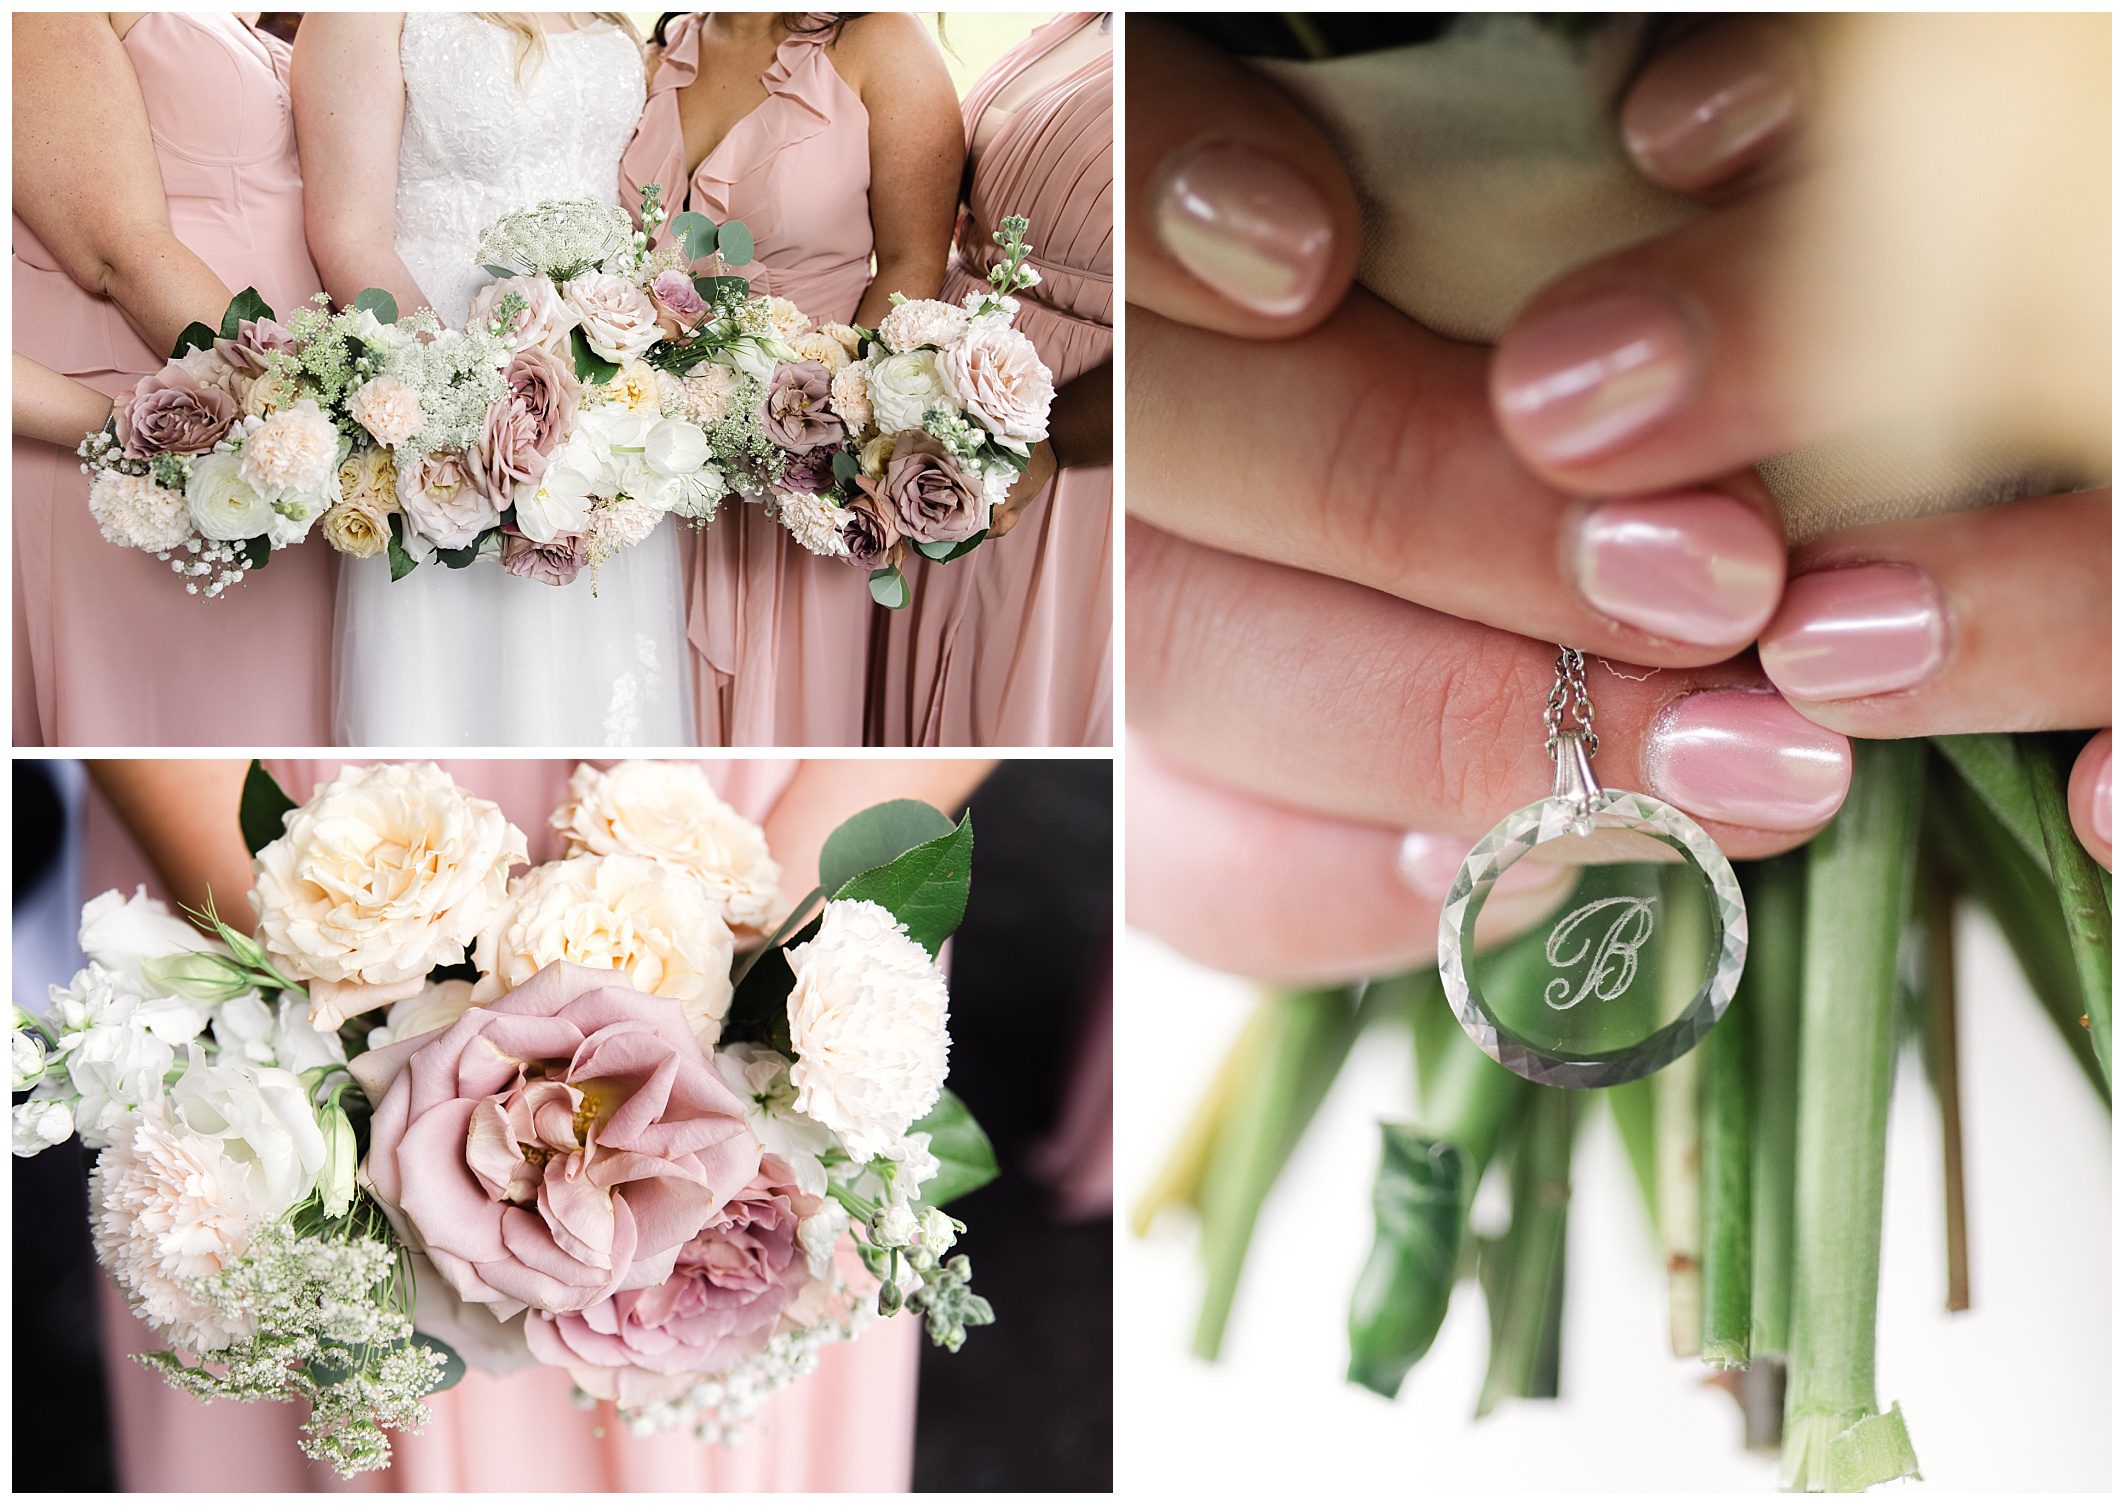 Collage of a bridal party holding pastel flower bouquets at a mountain wedding, a close-up of a manicured hand with a pendant, and a detailed view of a bouquet.